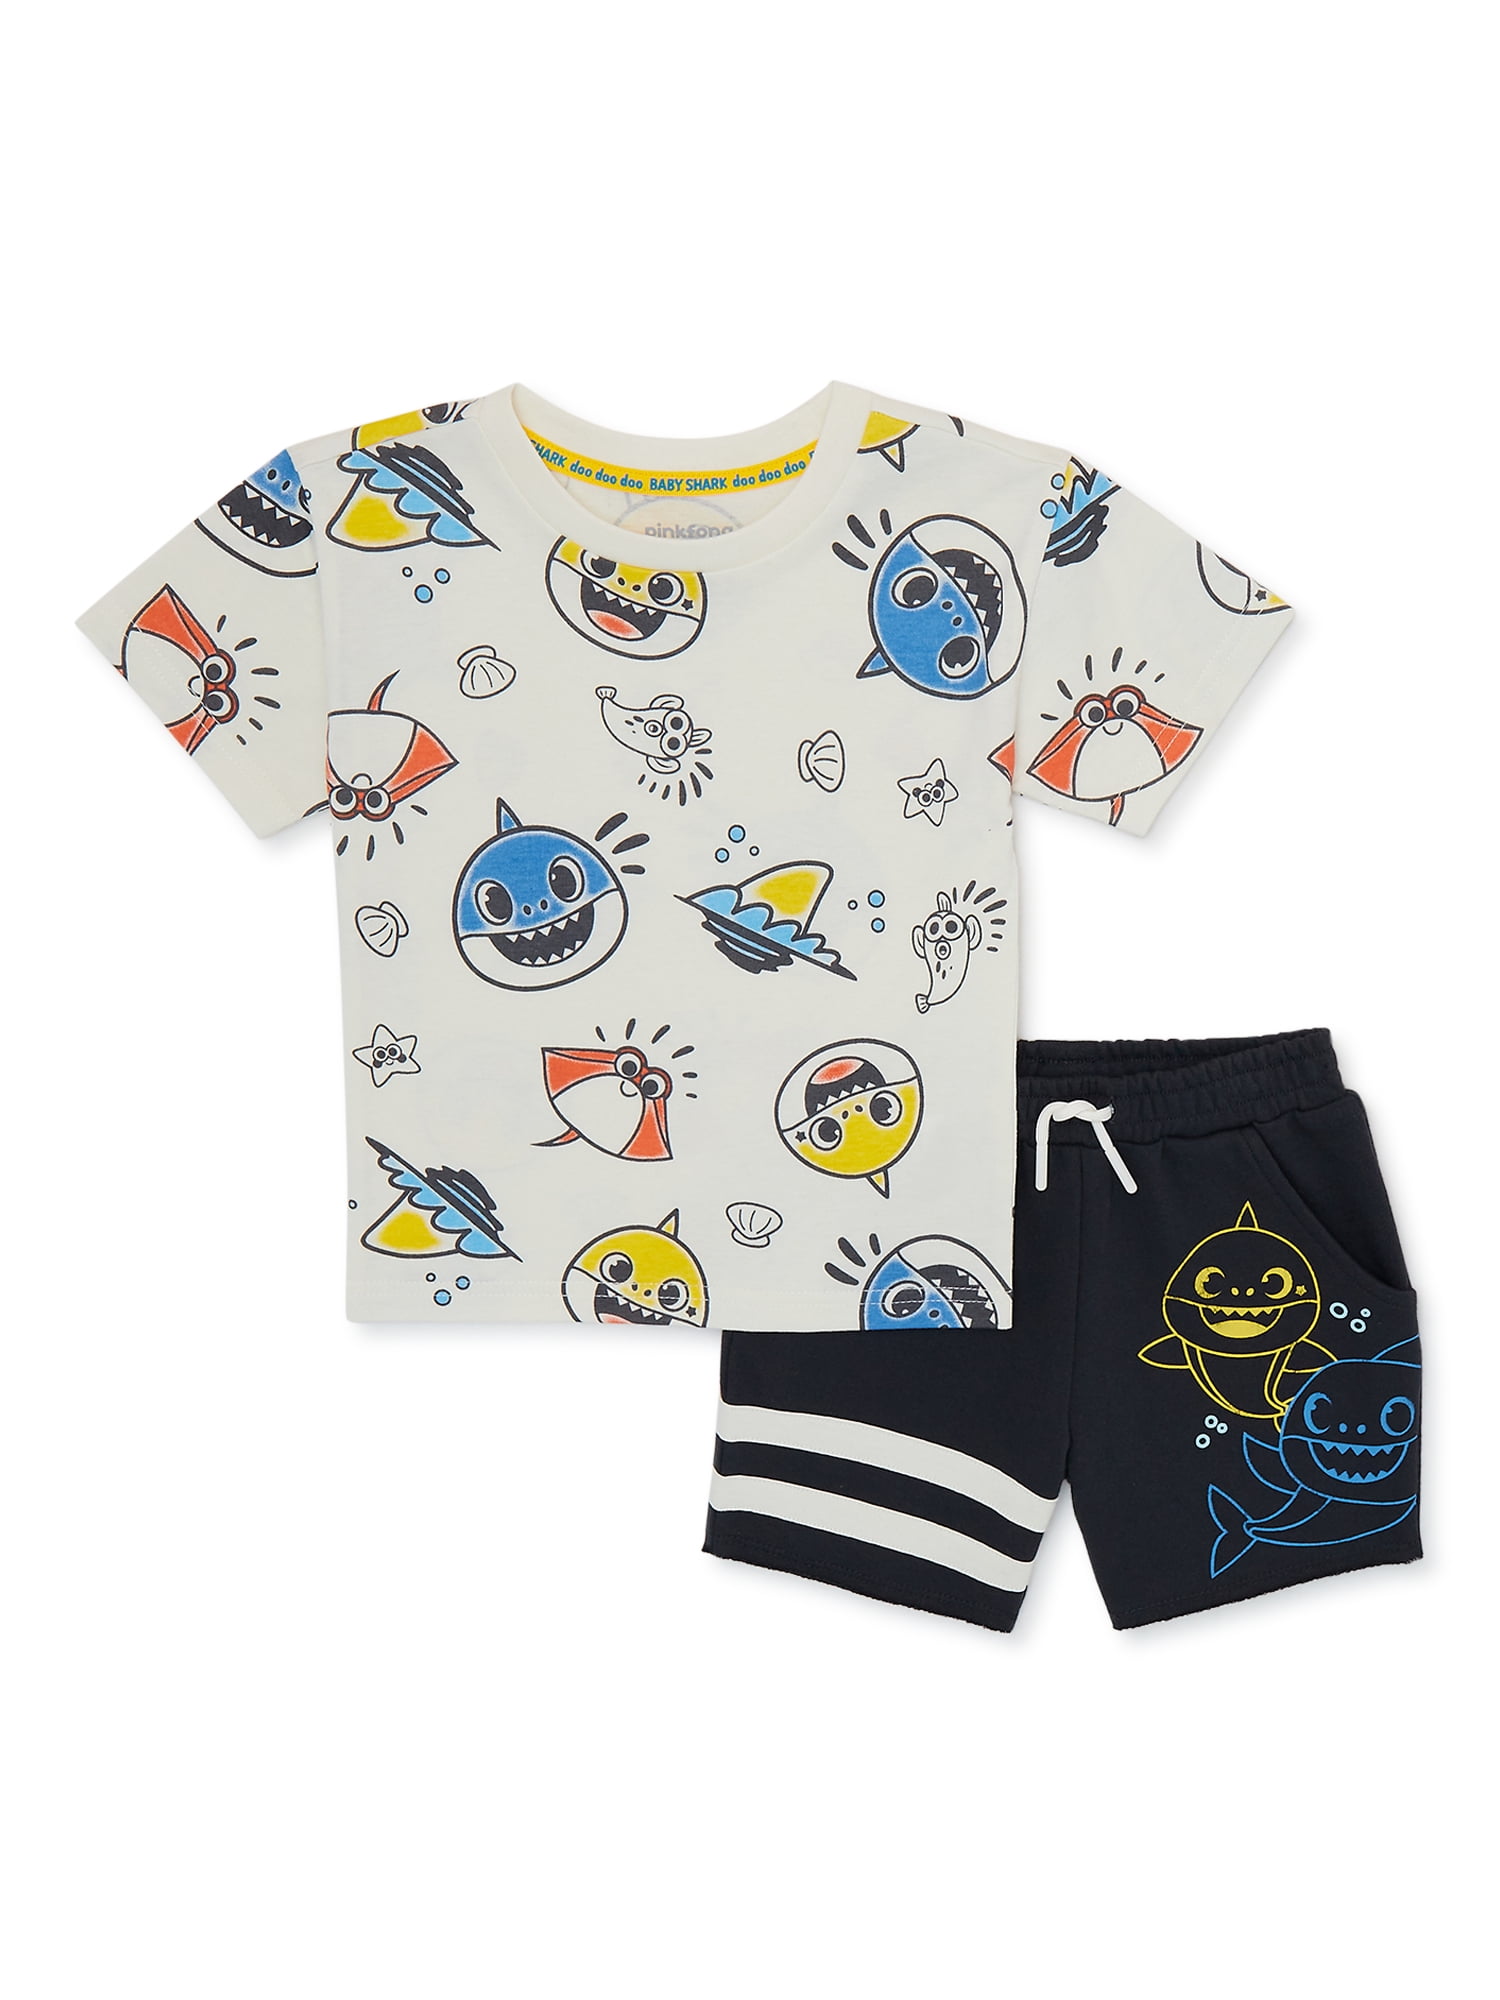 Baby Shark Toddler Boys T-Shirt and Shorts Set, 2-Piece, Sizes 18M-5T